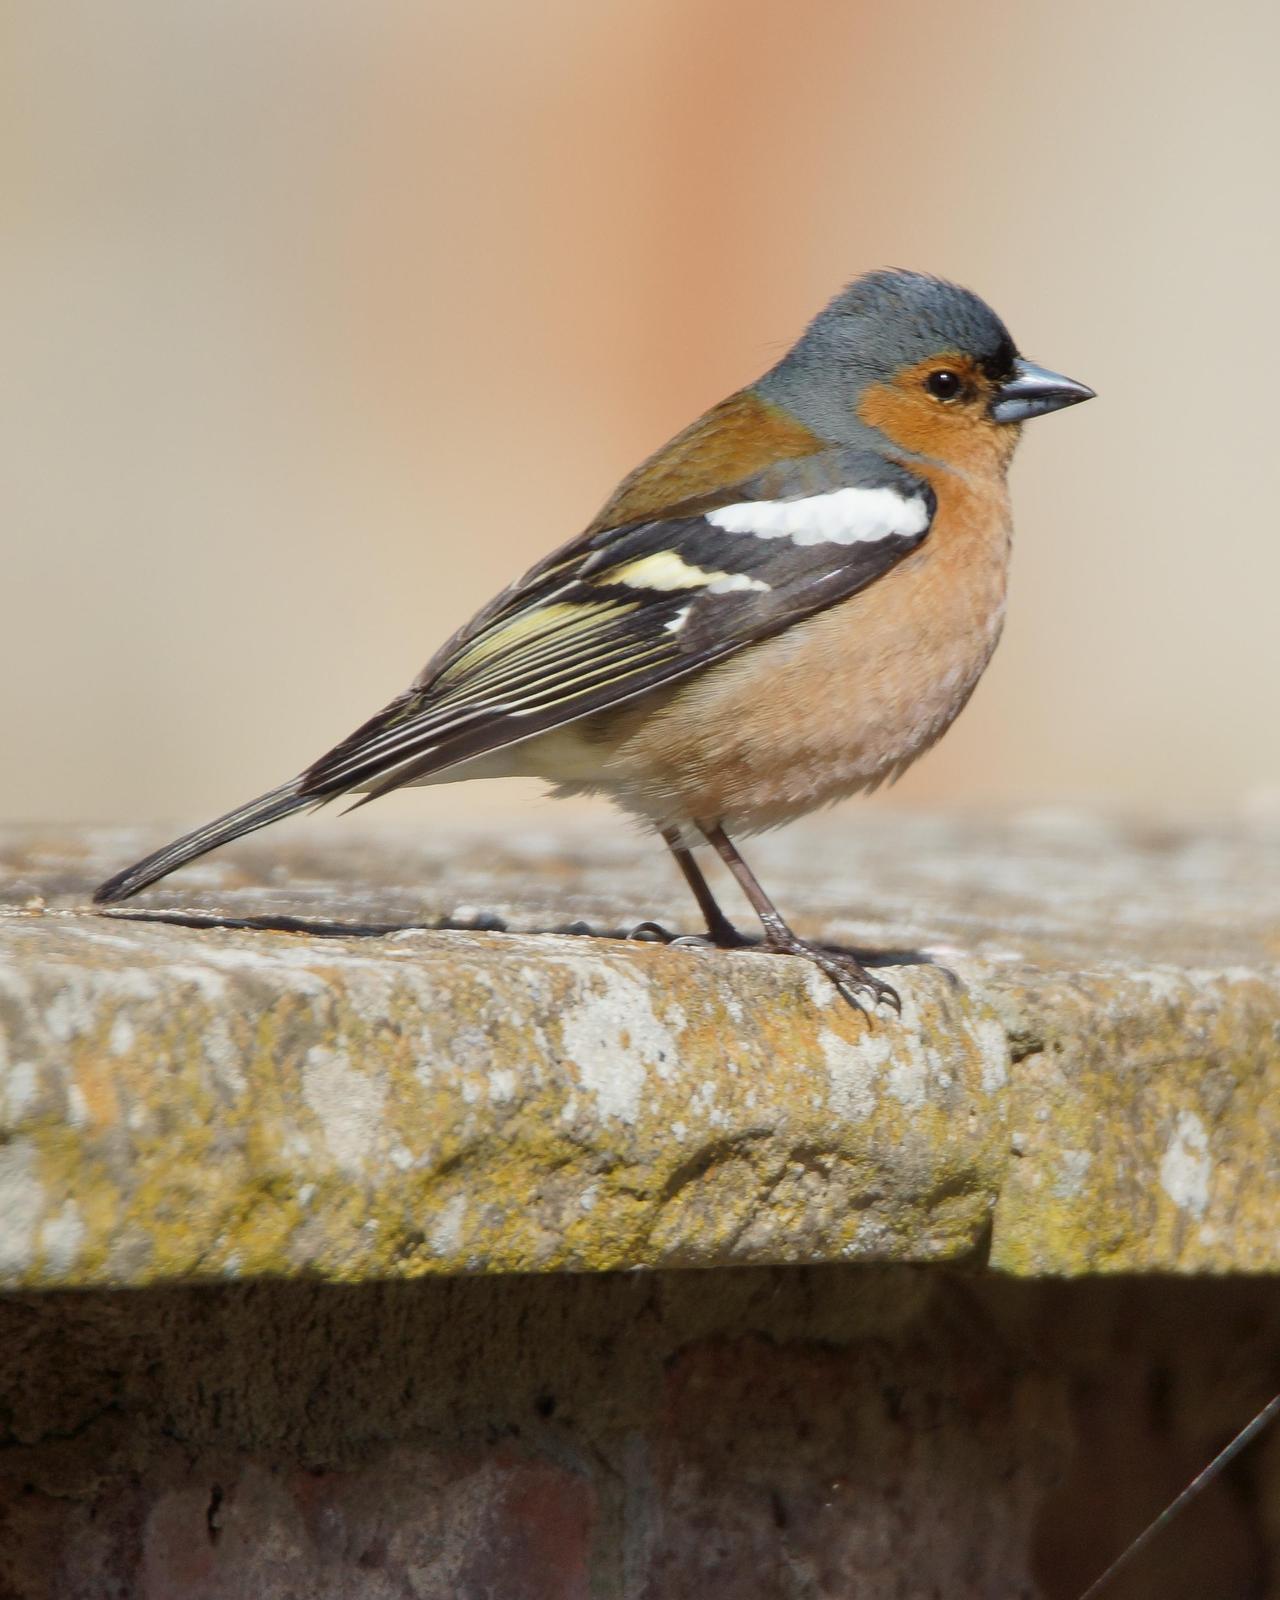 Common Chaffinch Photo by Steve Percival